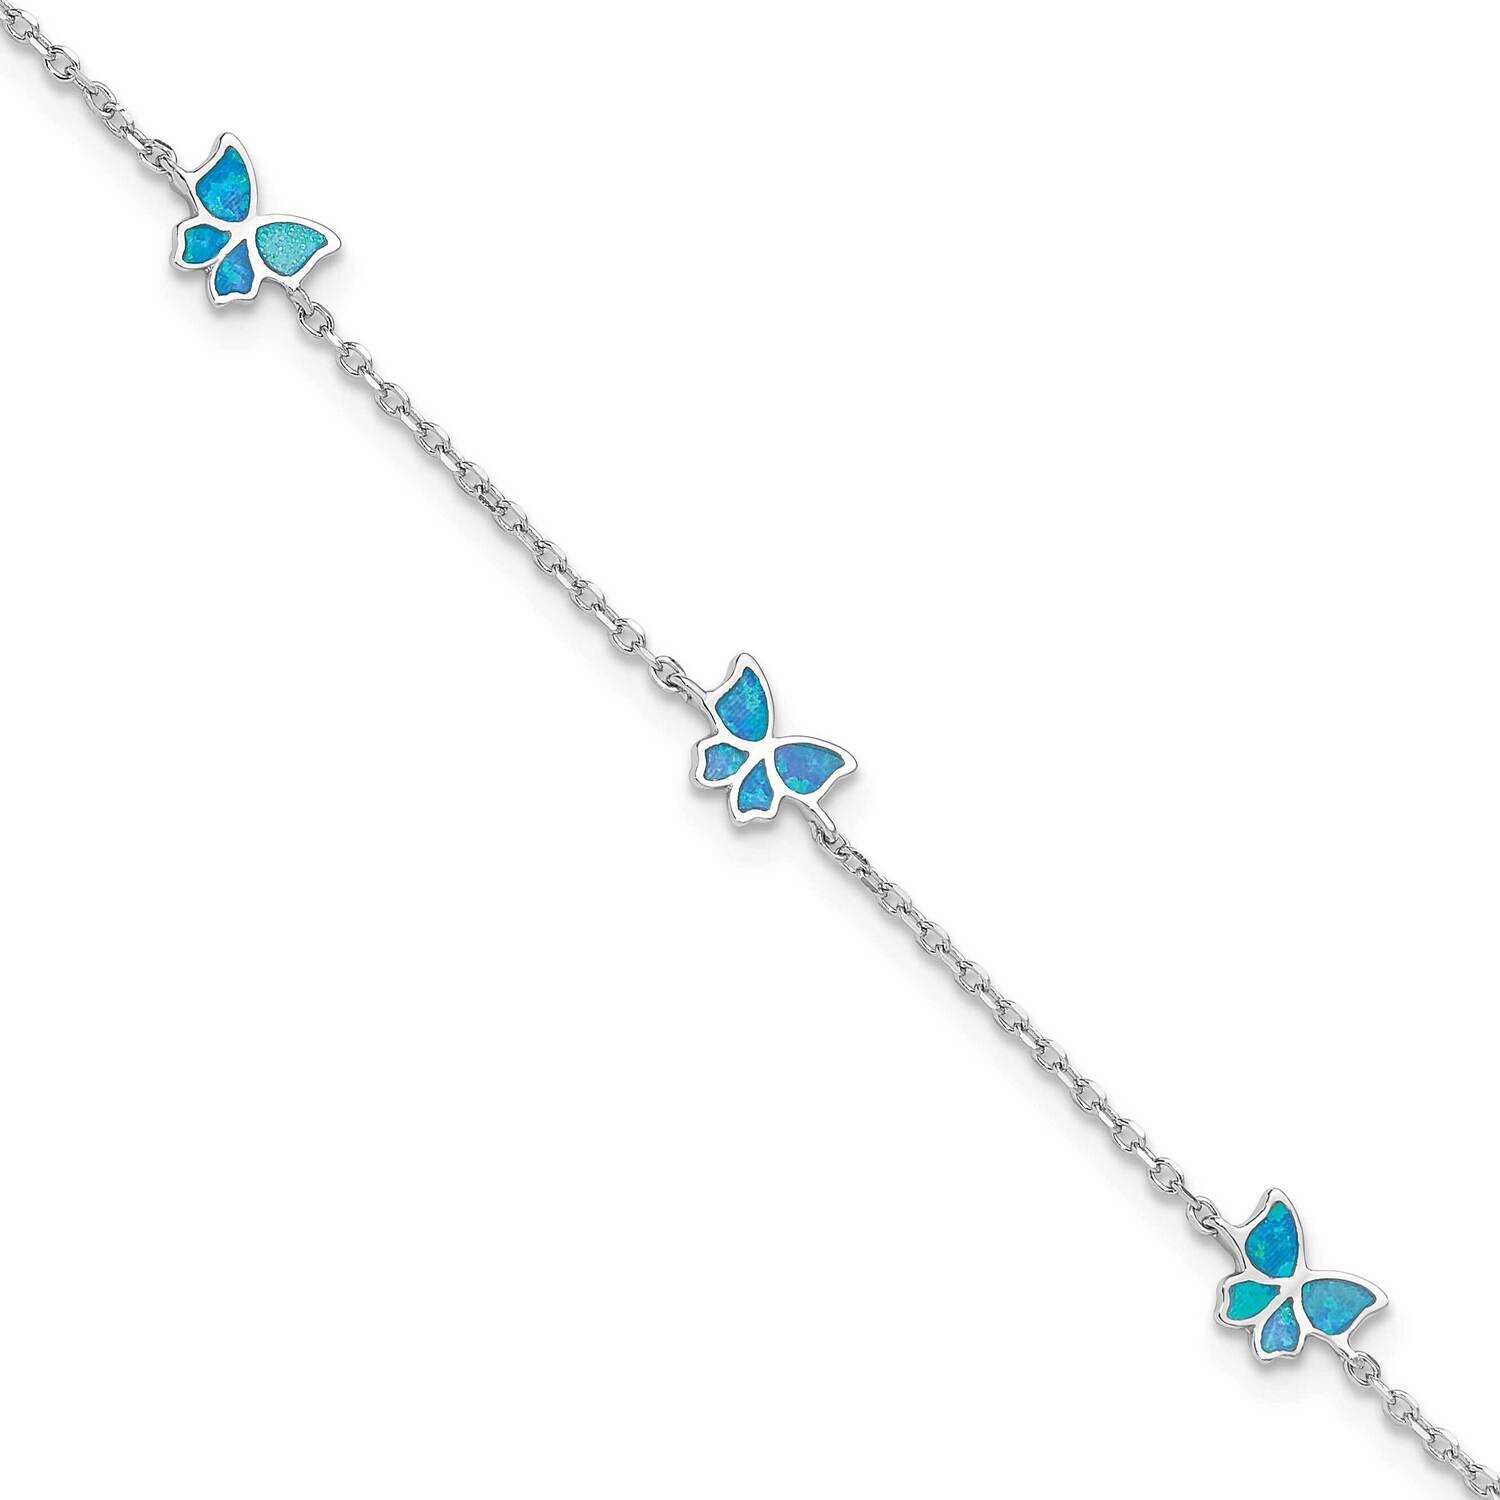 Rh-Plated Blue Cr. Opal Butterflies 9 Inch Plus .5 Inch Extension Anklet Sterling Silver QG6306-9